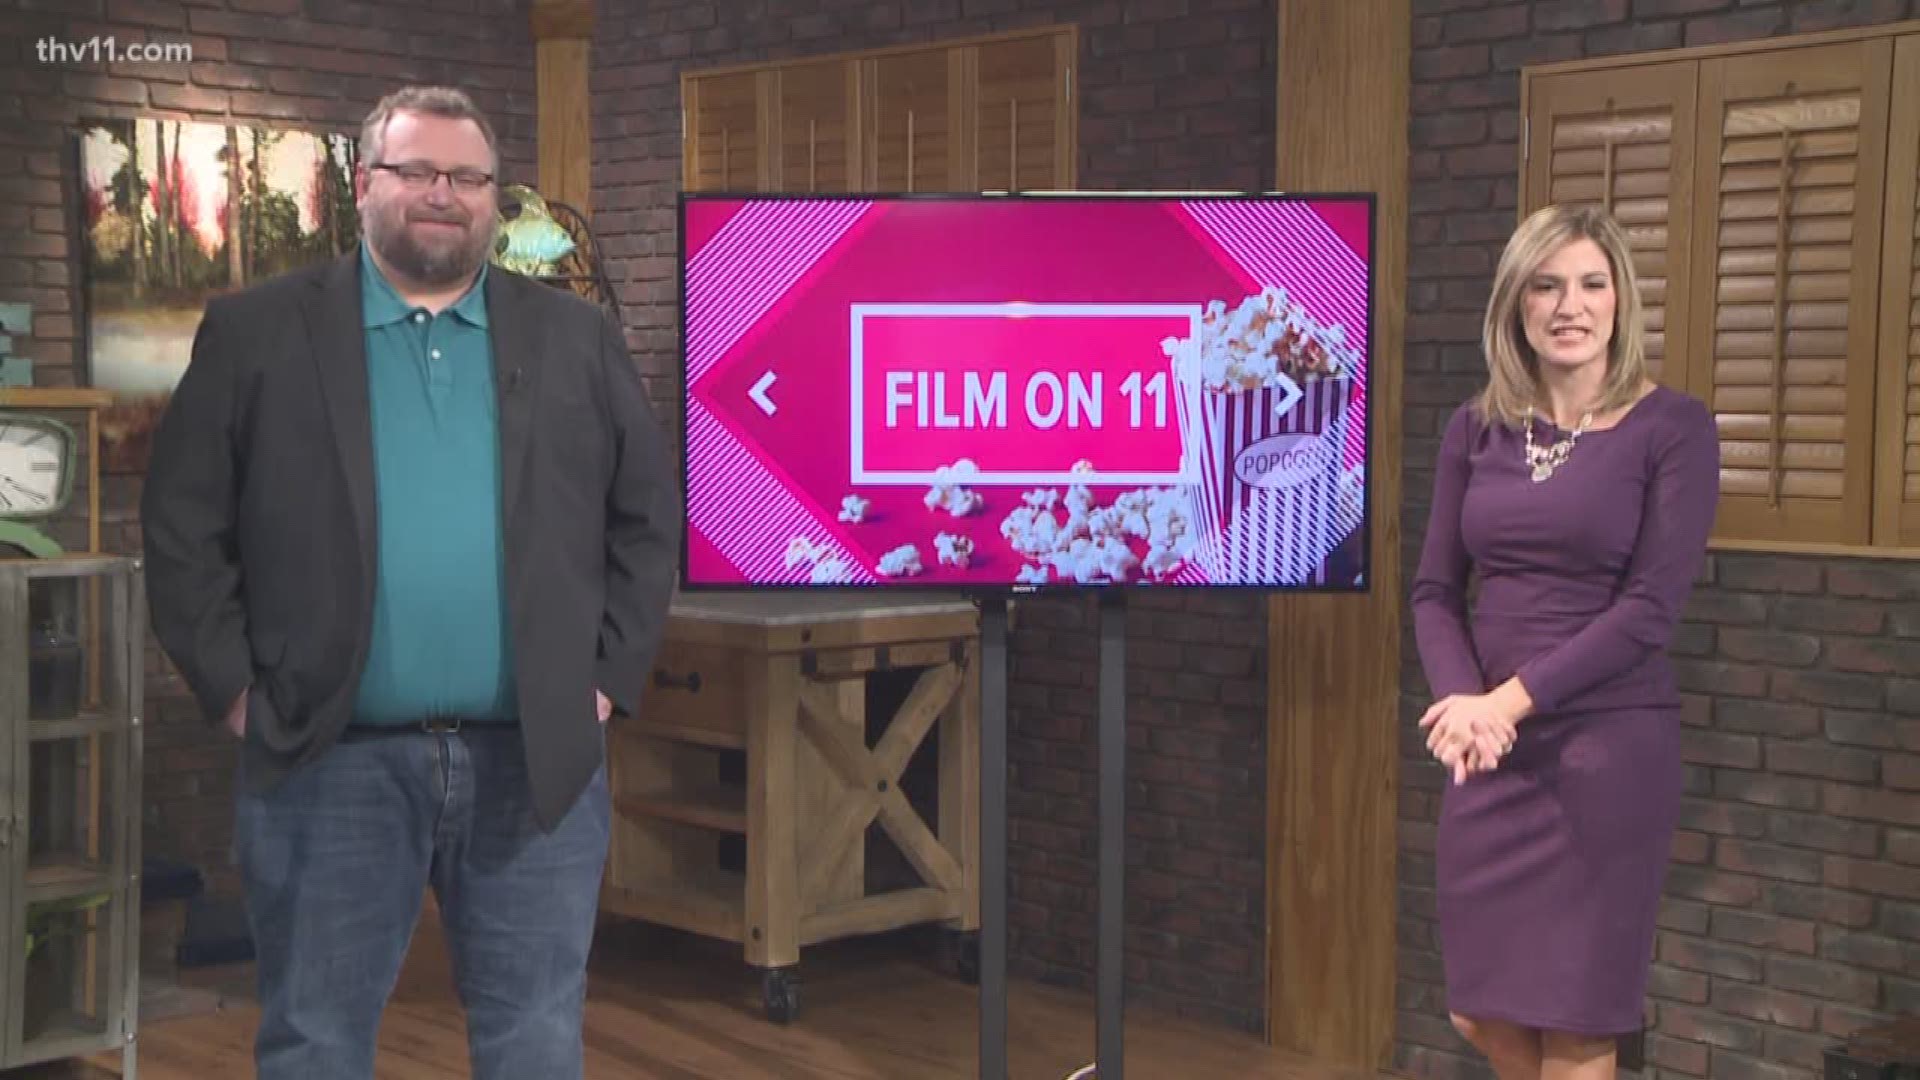 THV11 Film Critic Jonathan Nettles tells us what's at the box office this weekend.